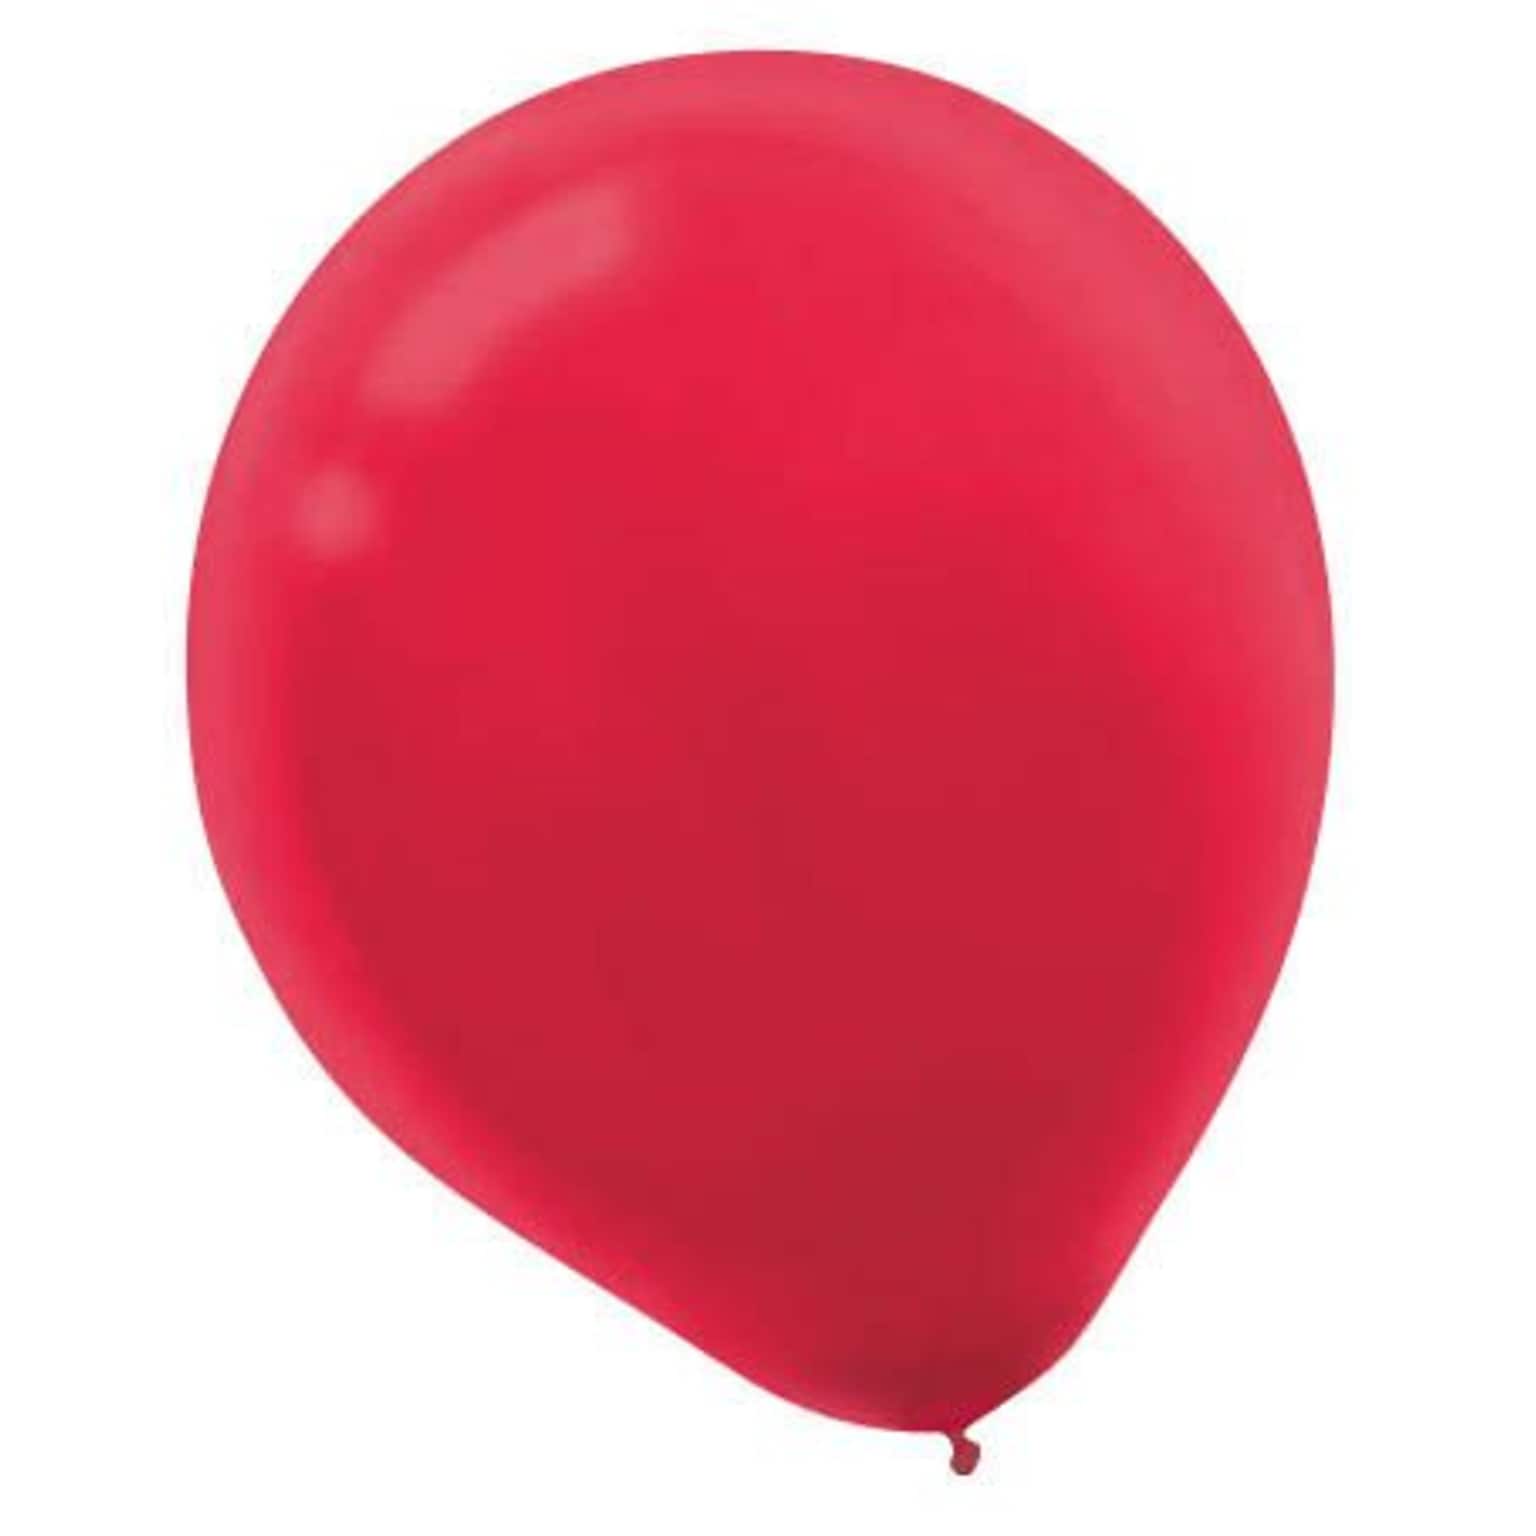 Amscan Solid Color Latex Balloons Packaged, 12, Apple Red, 4/Pack, 72 Per Pack (113250.4)